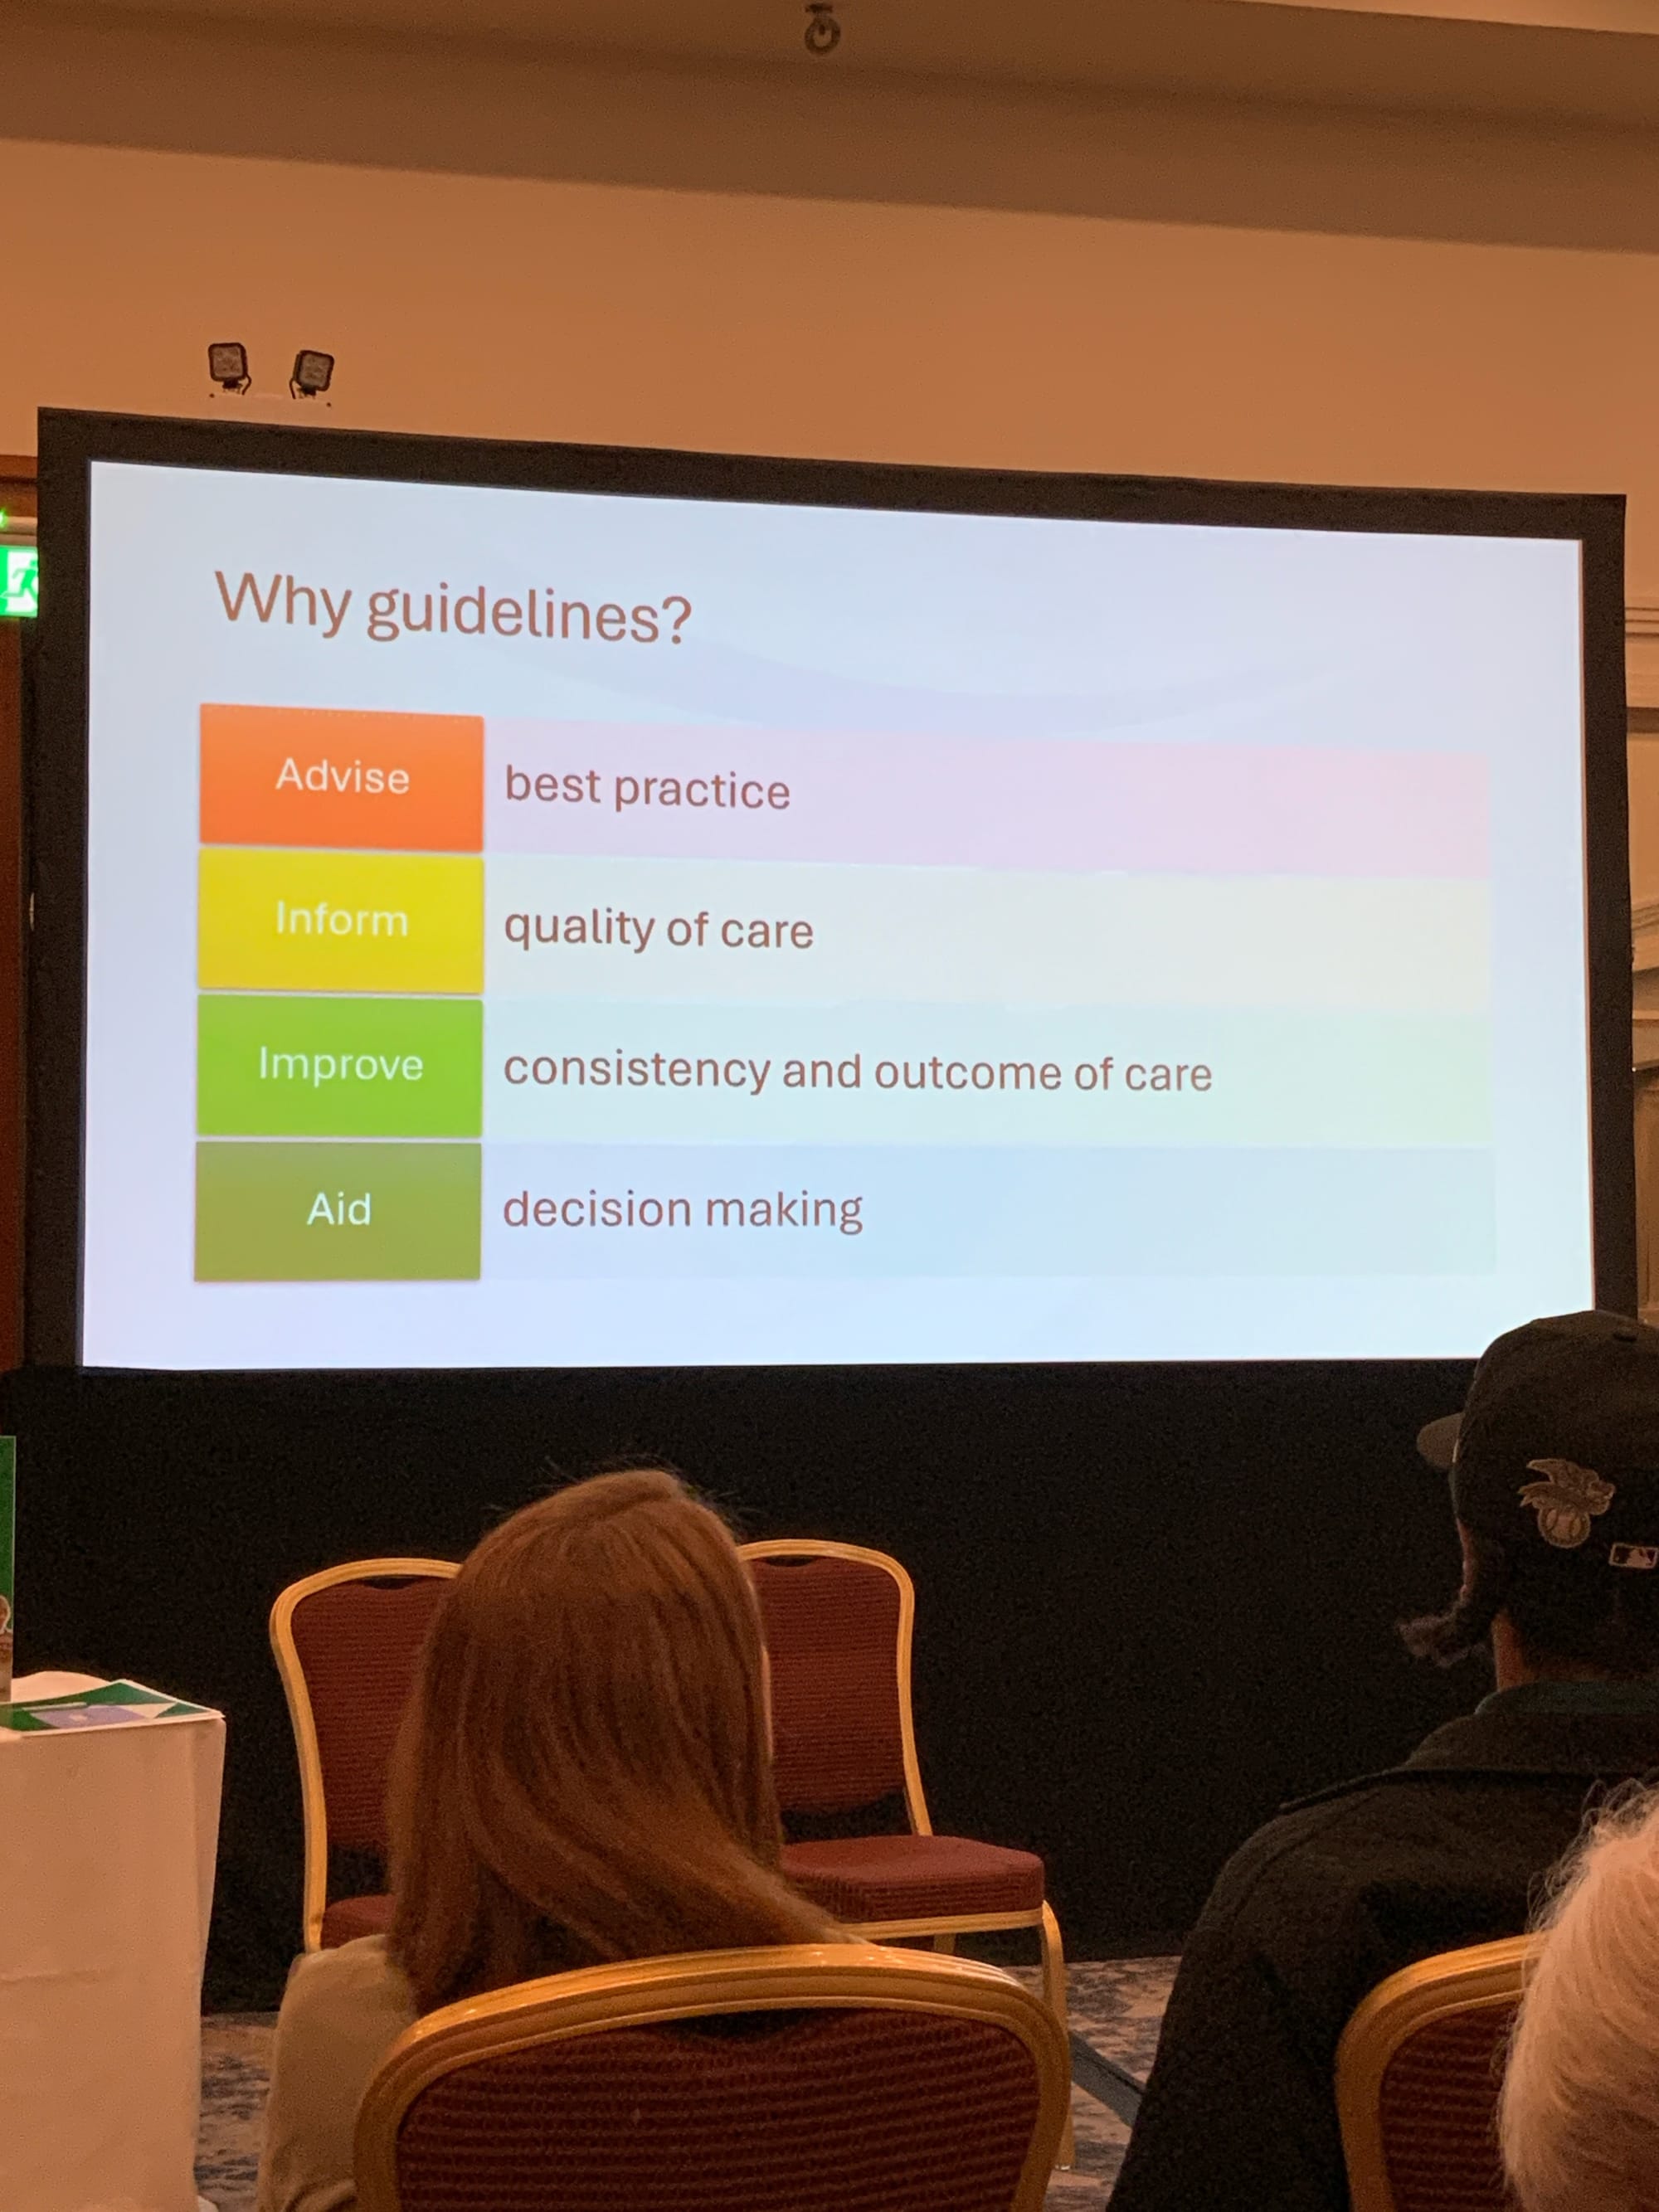 The European Guidelines for PKU advise best practice, inform quality of care, improve consistency and outcomes of care, and and with decision making.